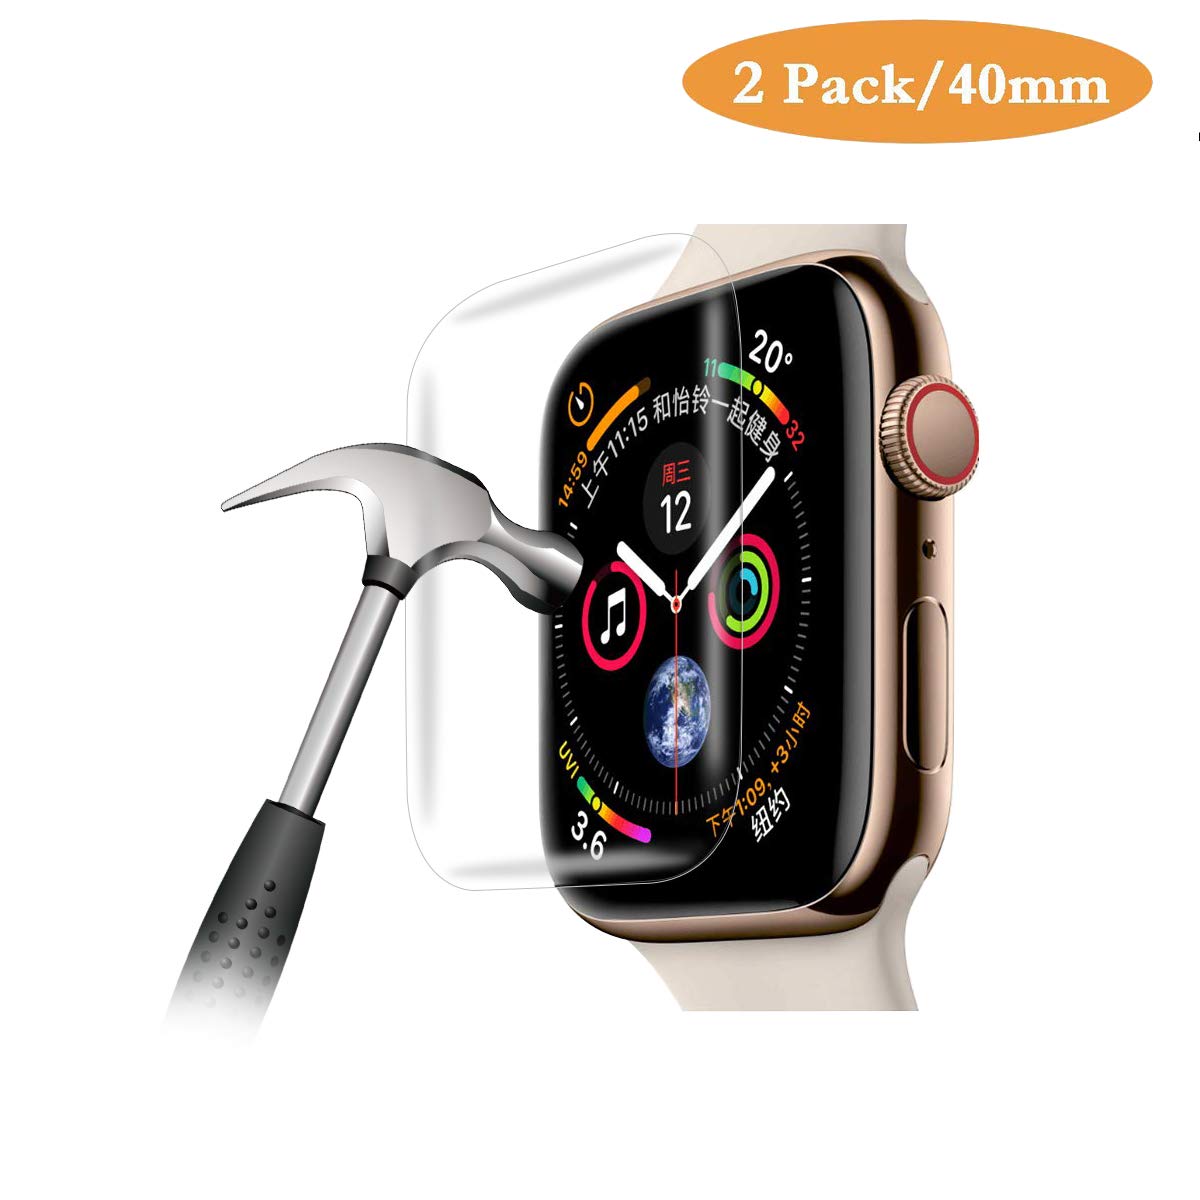 Book Cover [2 Pack] Fotbor [Full Coverage] [Full Glue] Compatible for Apple Watch 40mm Series 4 Tempered Glass Screen Protector, Anti-Scratch HD Clear Anti-Bubble for iWatch 40mm Screen Protector